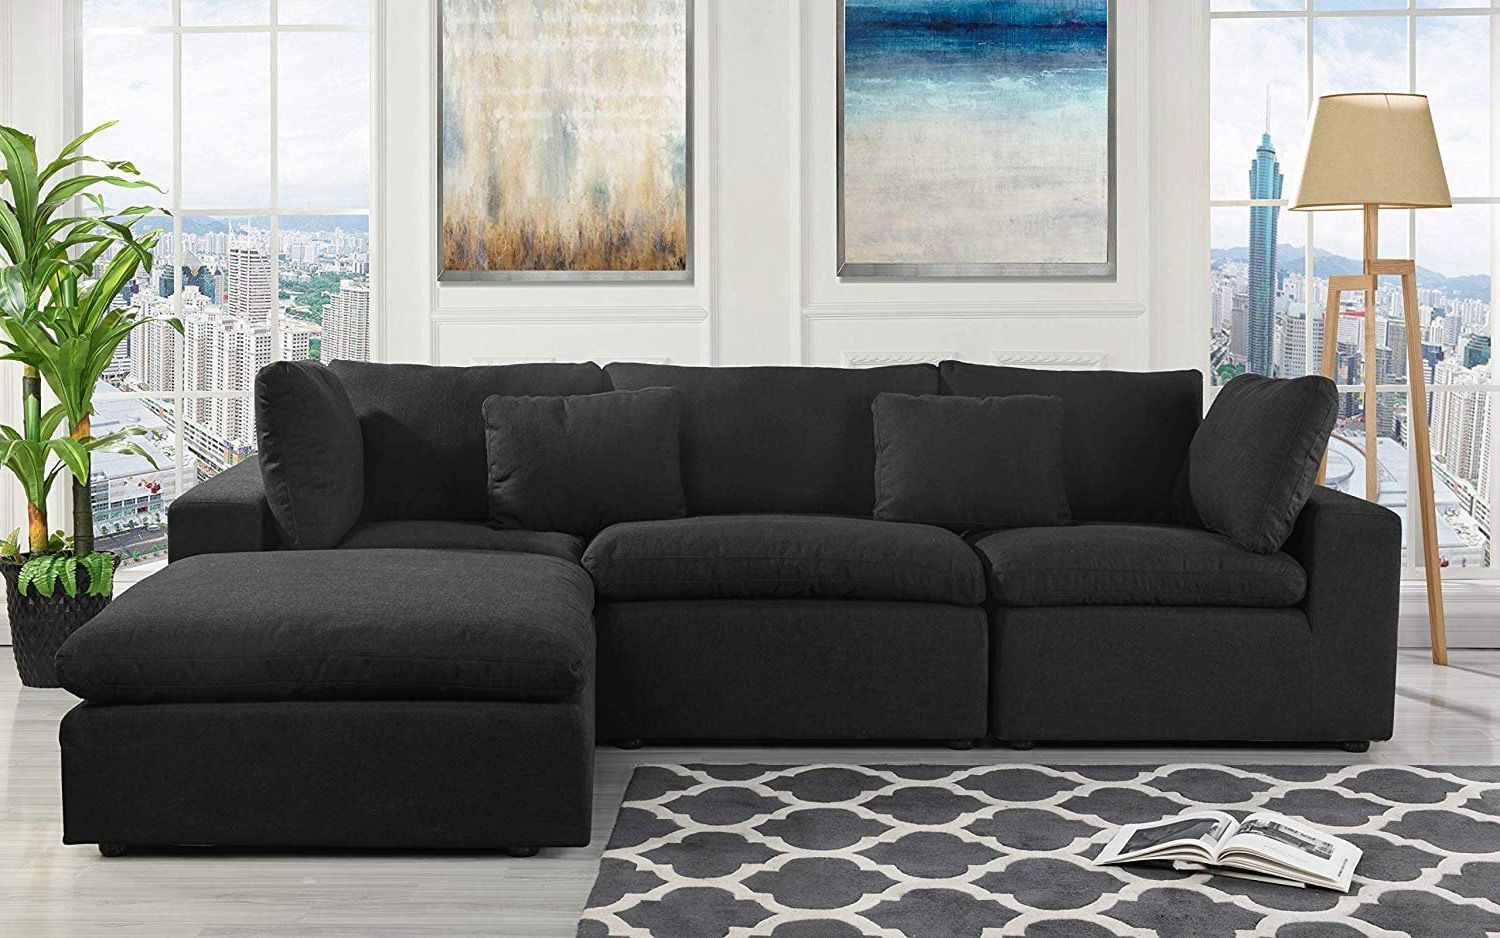 Classic Large Linen Fabric Sectional Sofa, L Shape Couch With Wide Intended For 3 Seat L Shaped Sofas In Black (Gallery 5 of 20)